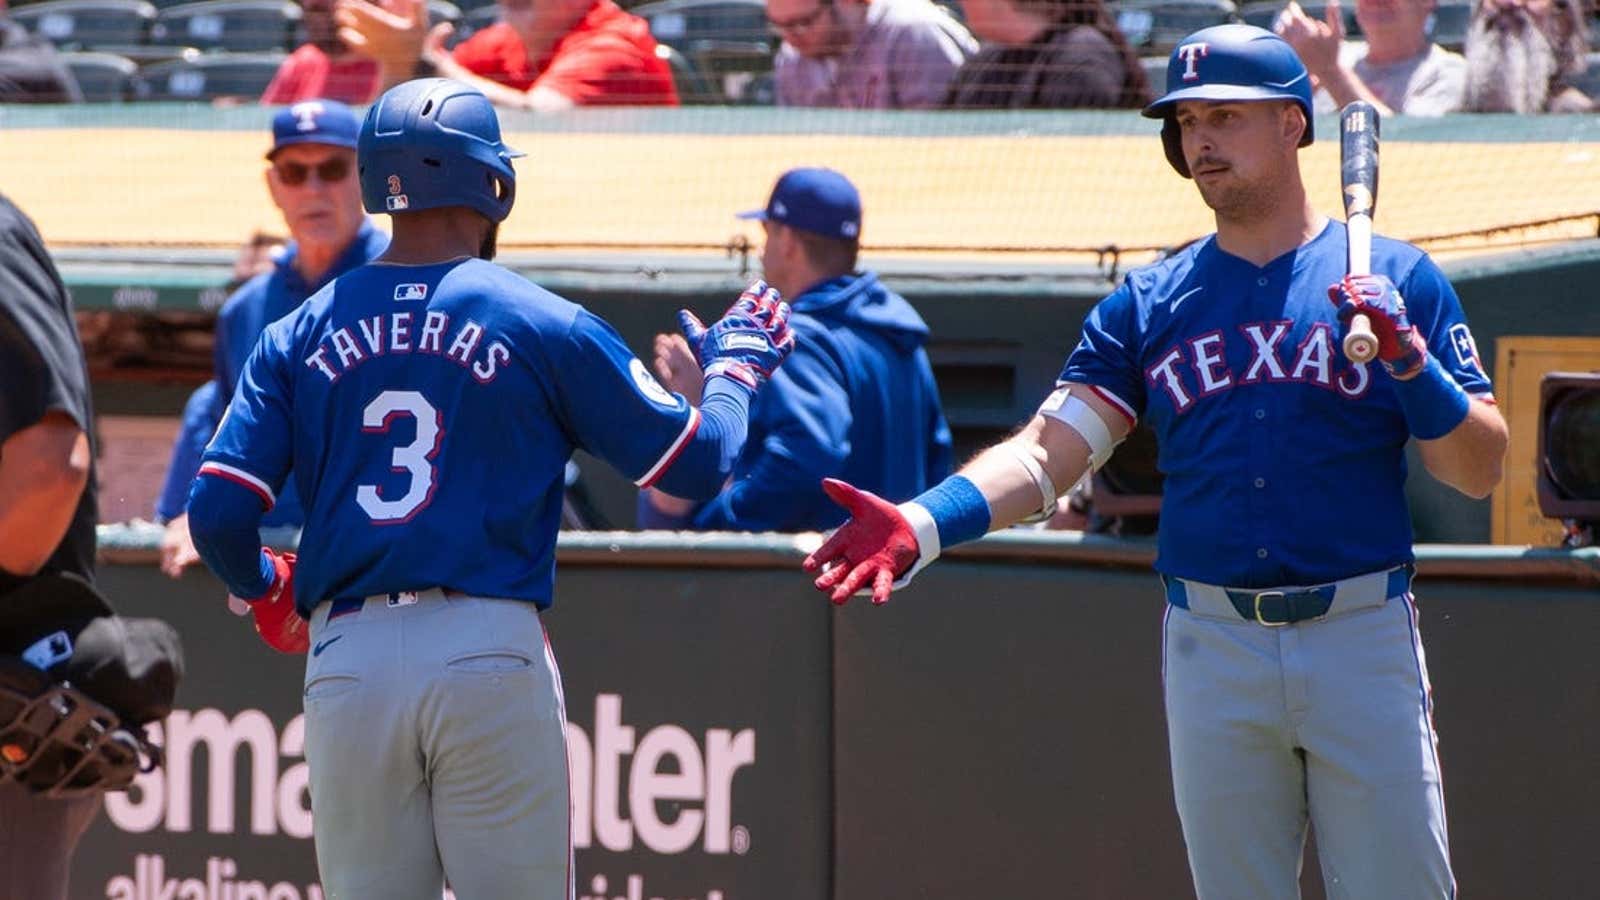 Image for Rangers face A's in doubleheader, seek 4-game sweep